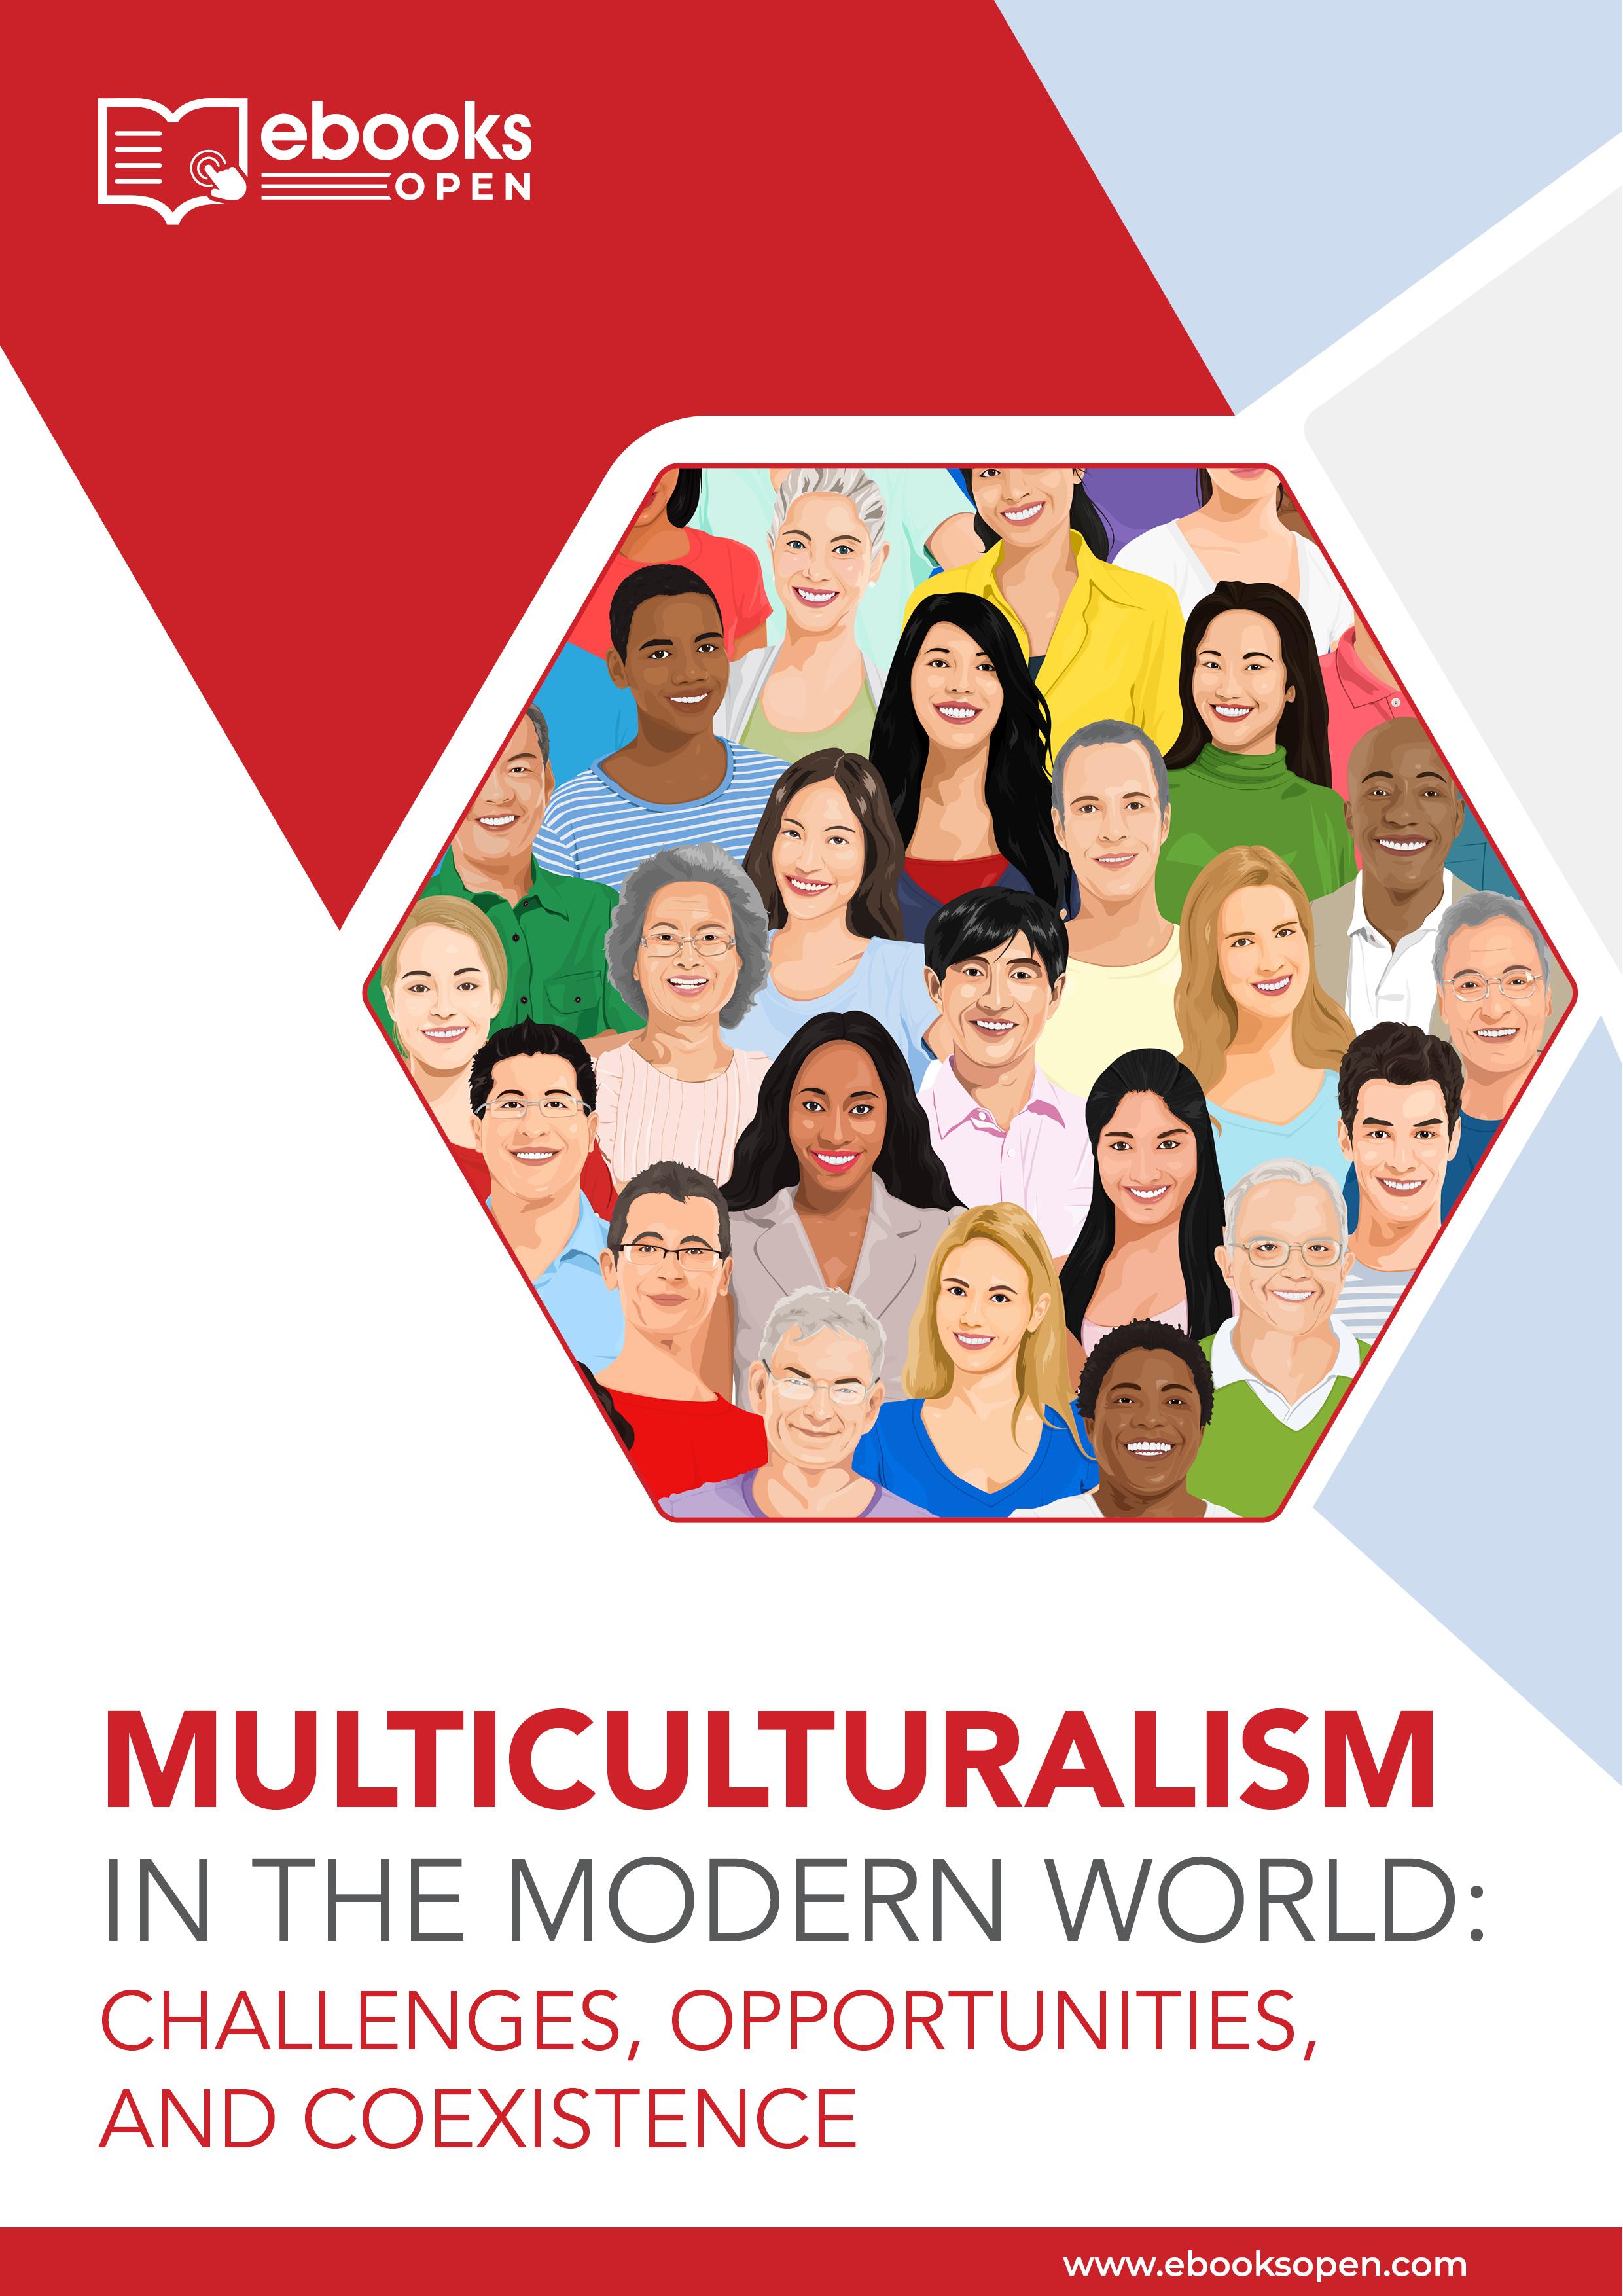 Multiculturalism in the Modern World: Challenges, Opportunities, and Coexistence